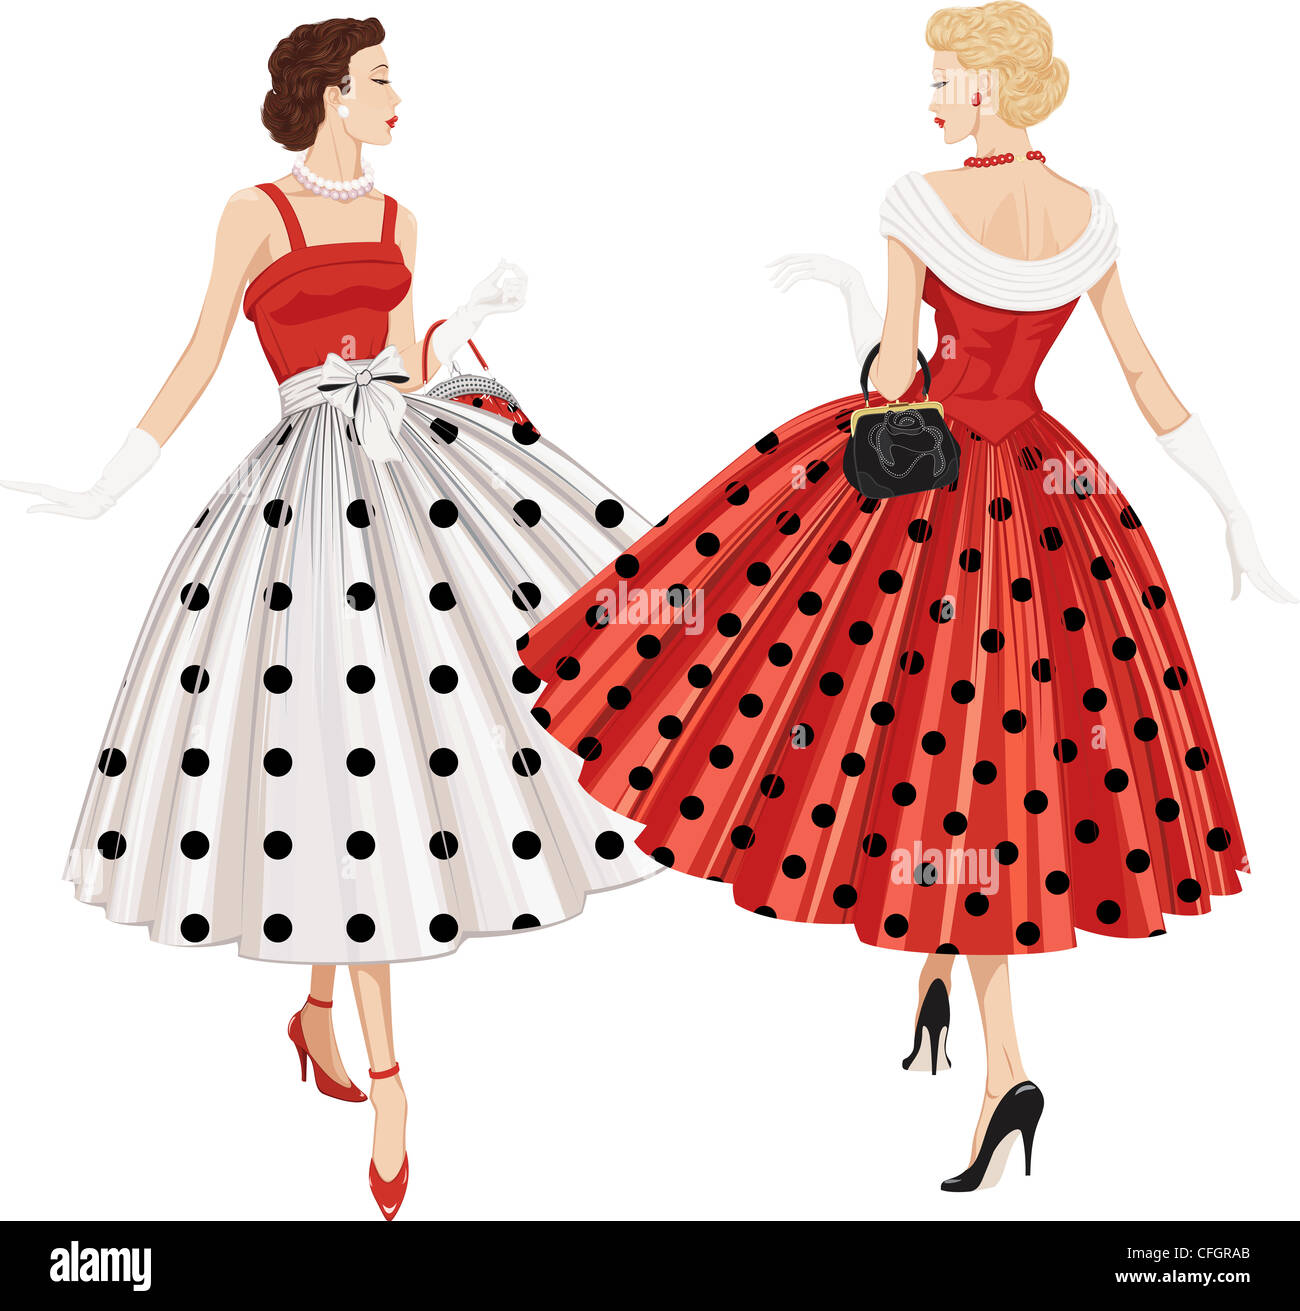 Illustration of two elegant women the brunette and the blond dressed in polka dots garments inspect each other passing by Stock Photo